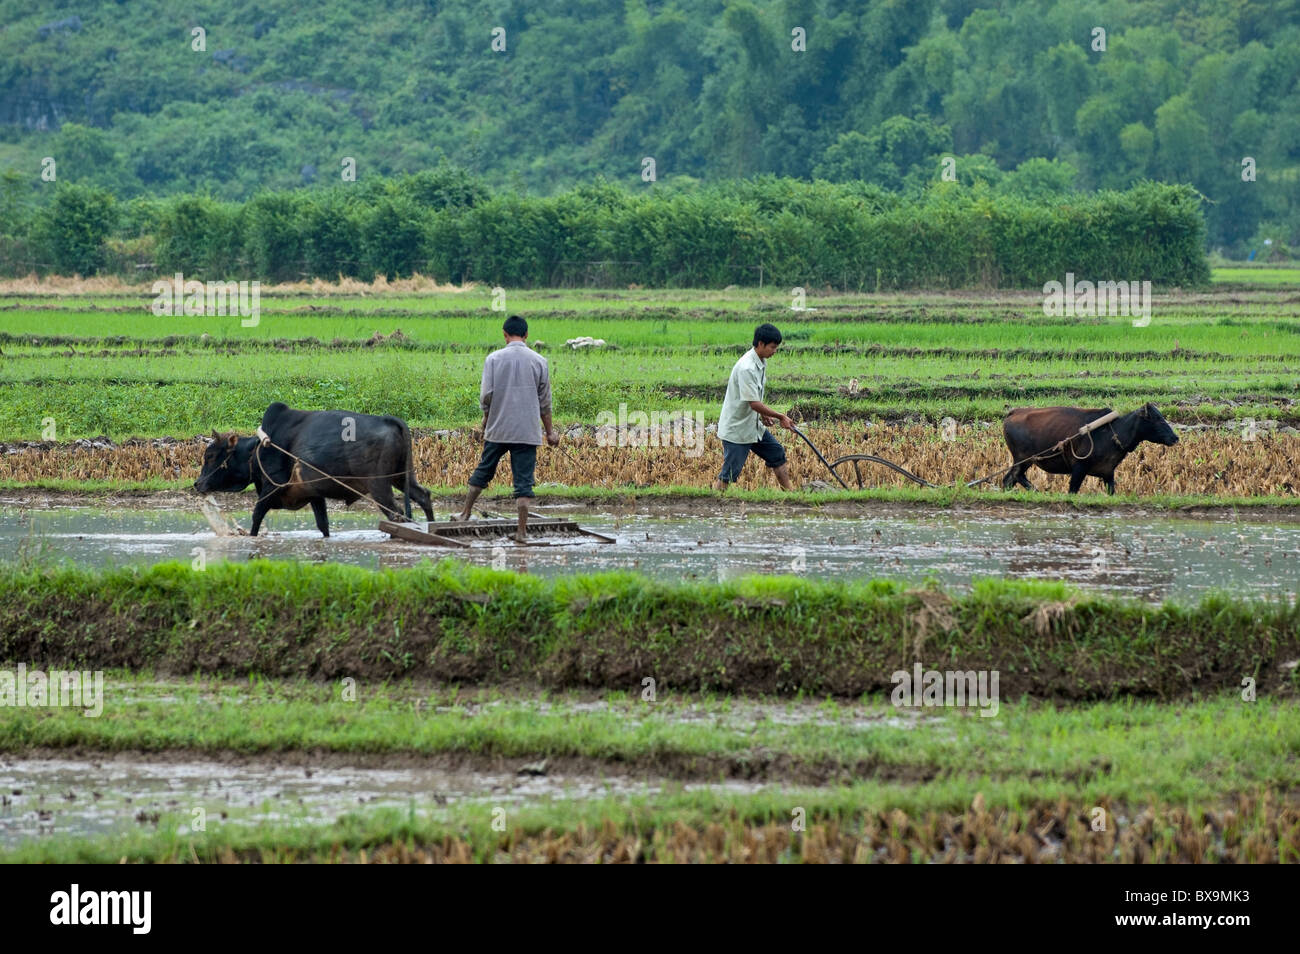 People working in paddy fields harvesting rice with buffaloes, Yangshuo, Guangxi, China. Stock Photo